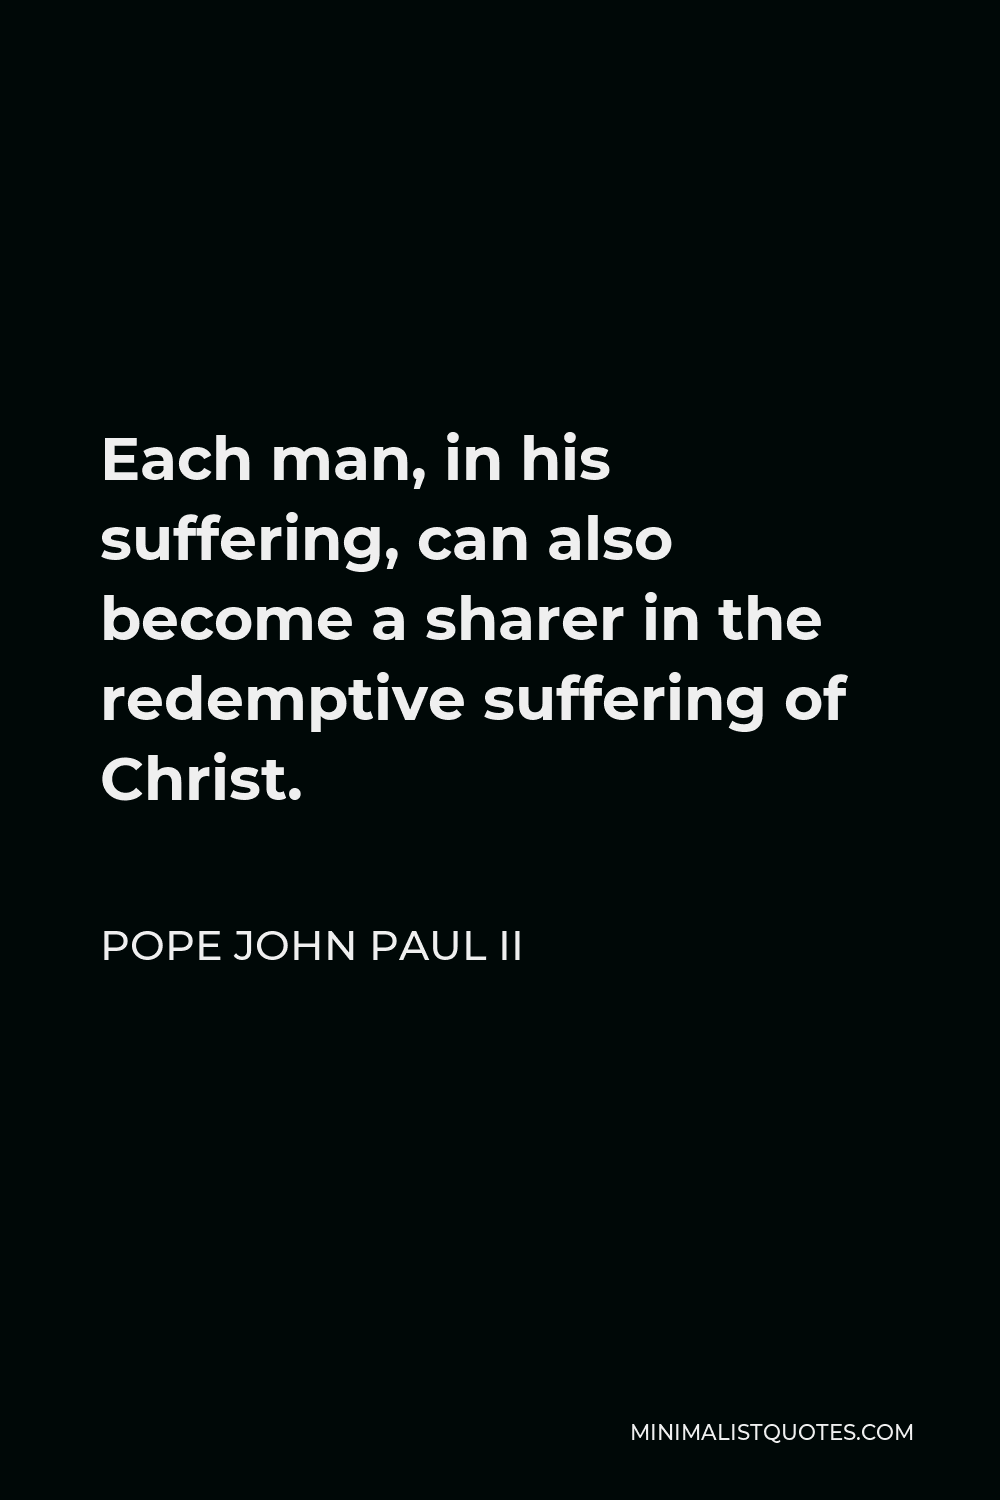 Pope John Paul II Quote - Each man, in his suffering, can also become a sharer in the redemptive suffering of Christ.